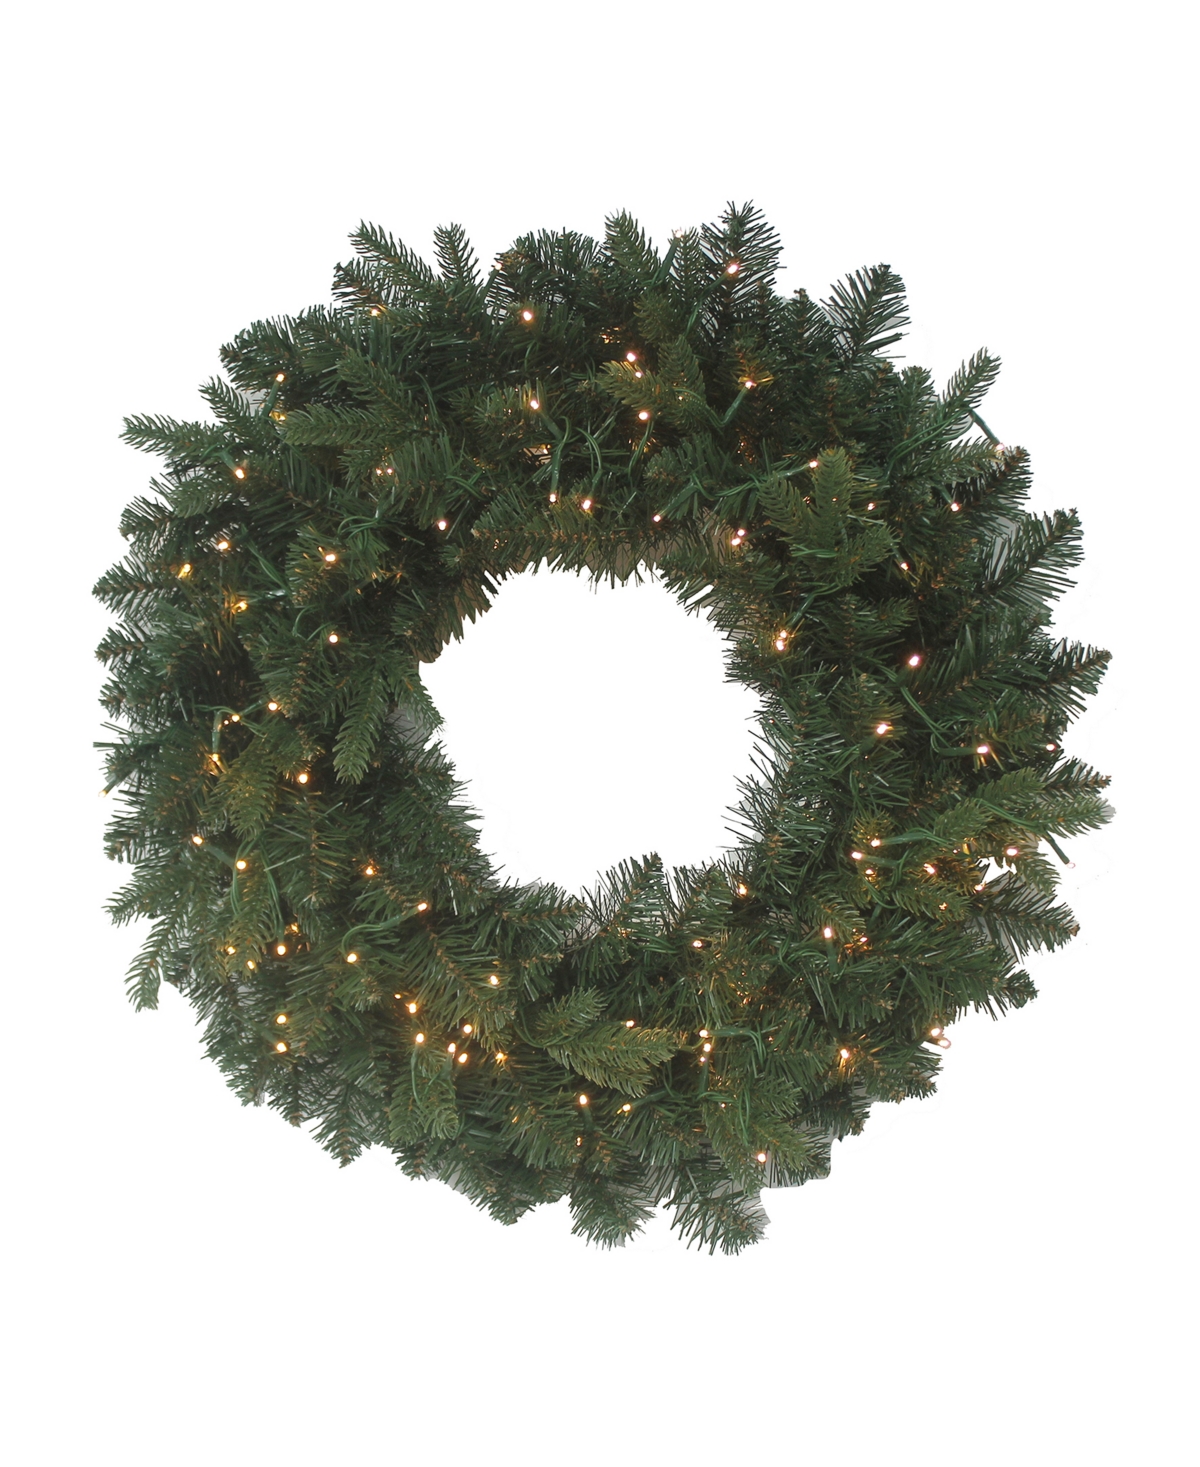 Kurt Adler 24" Battery-operated Led Noble Fir Wreath With Warm Lights In Red